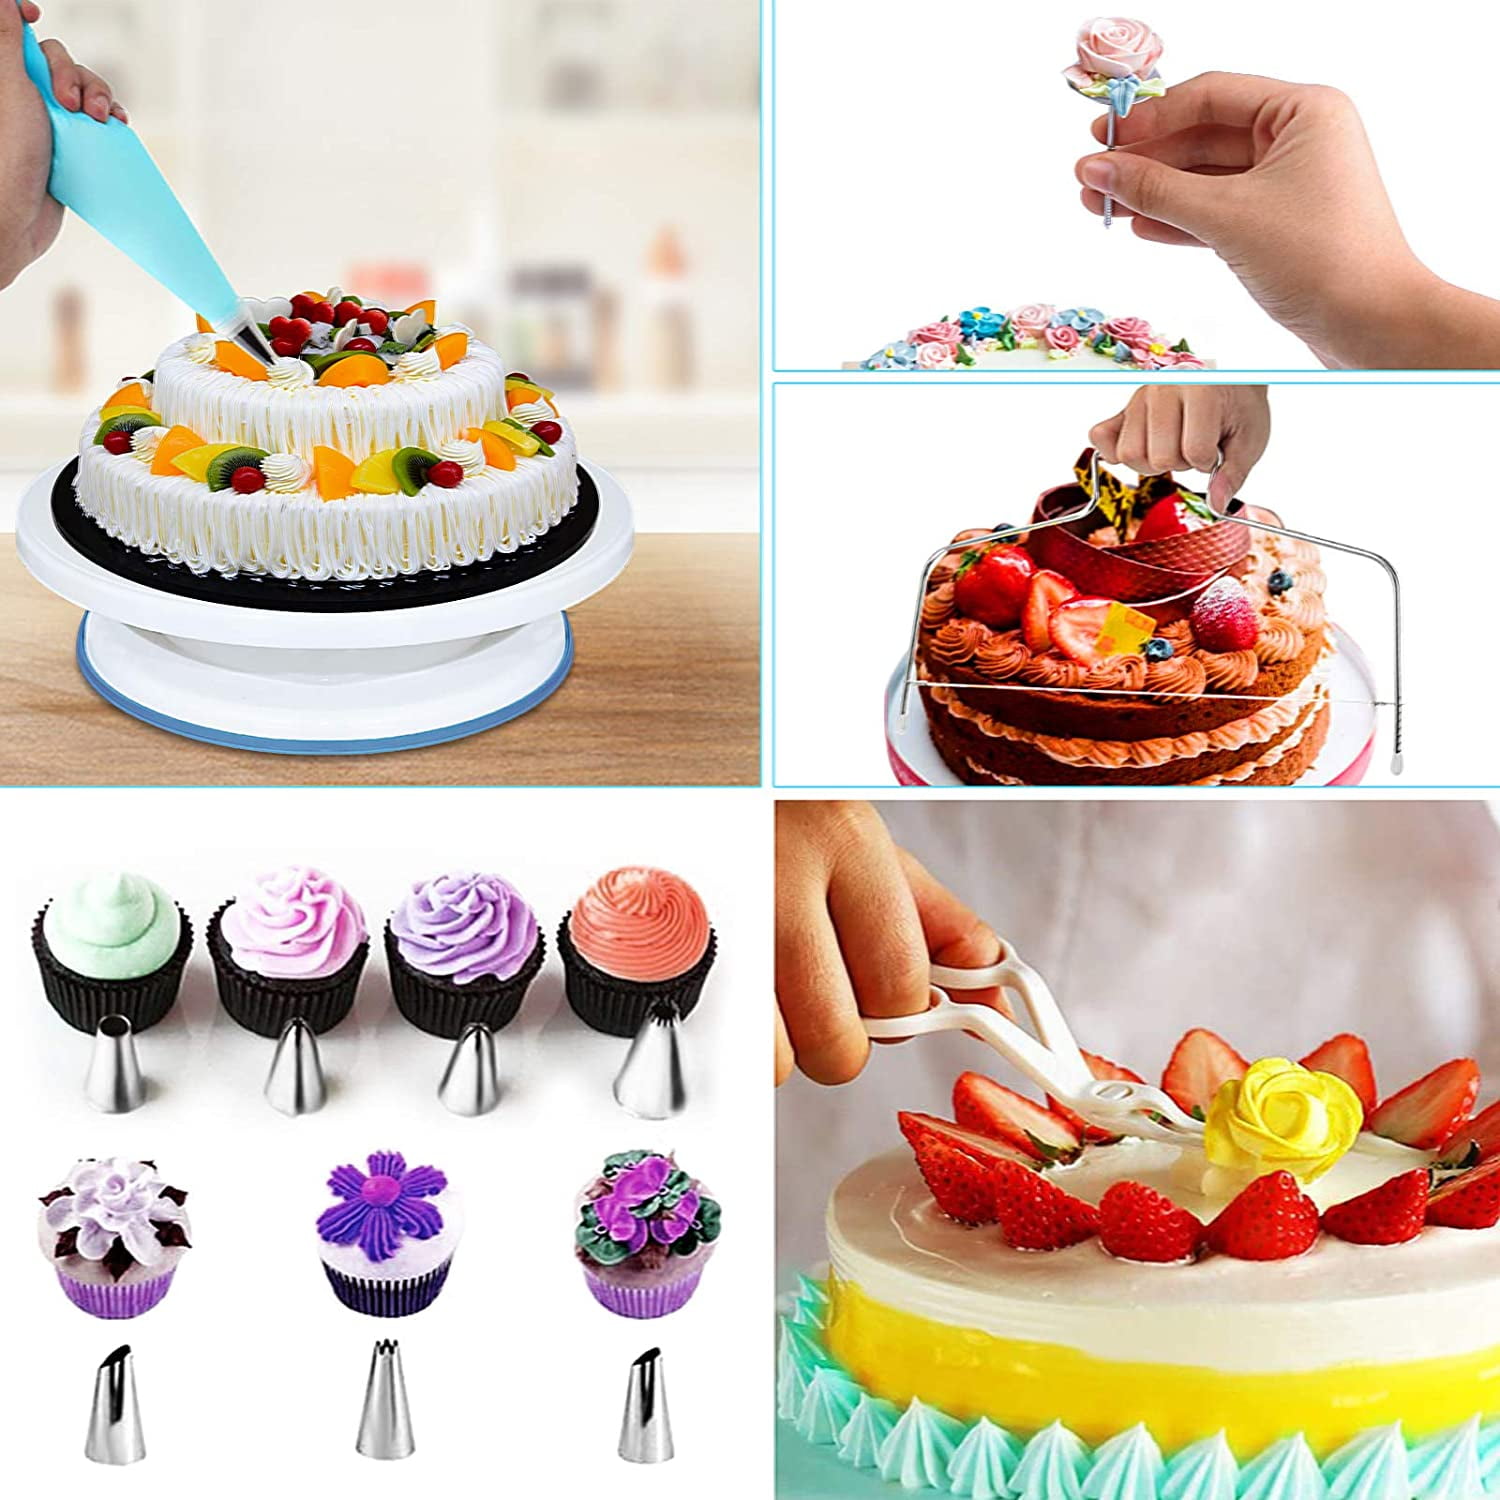 Best Cake Decorating Tools, Stencils, Fondant Tools and Silicone Molds